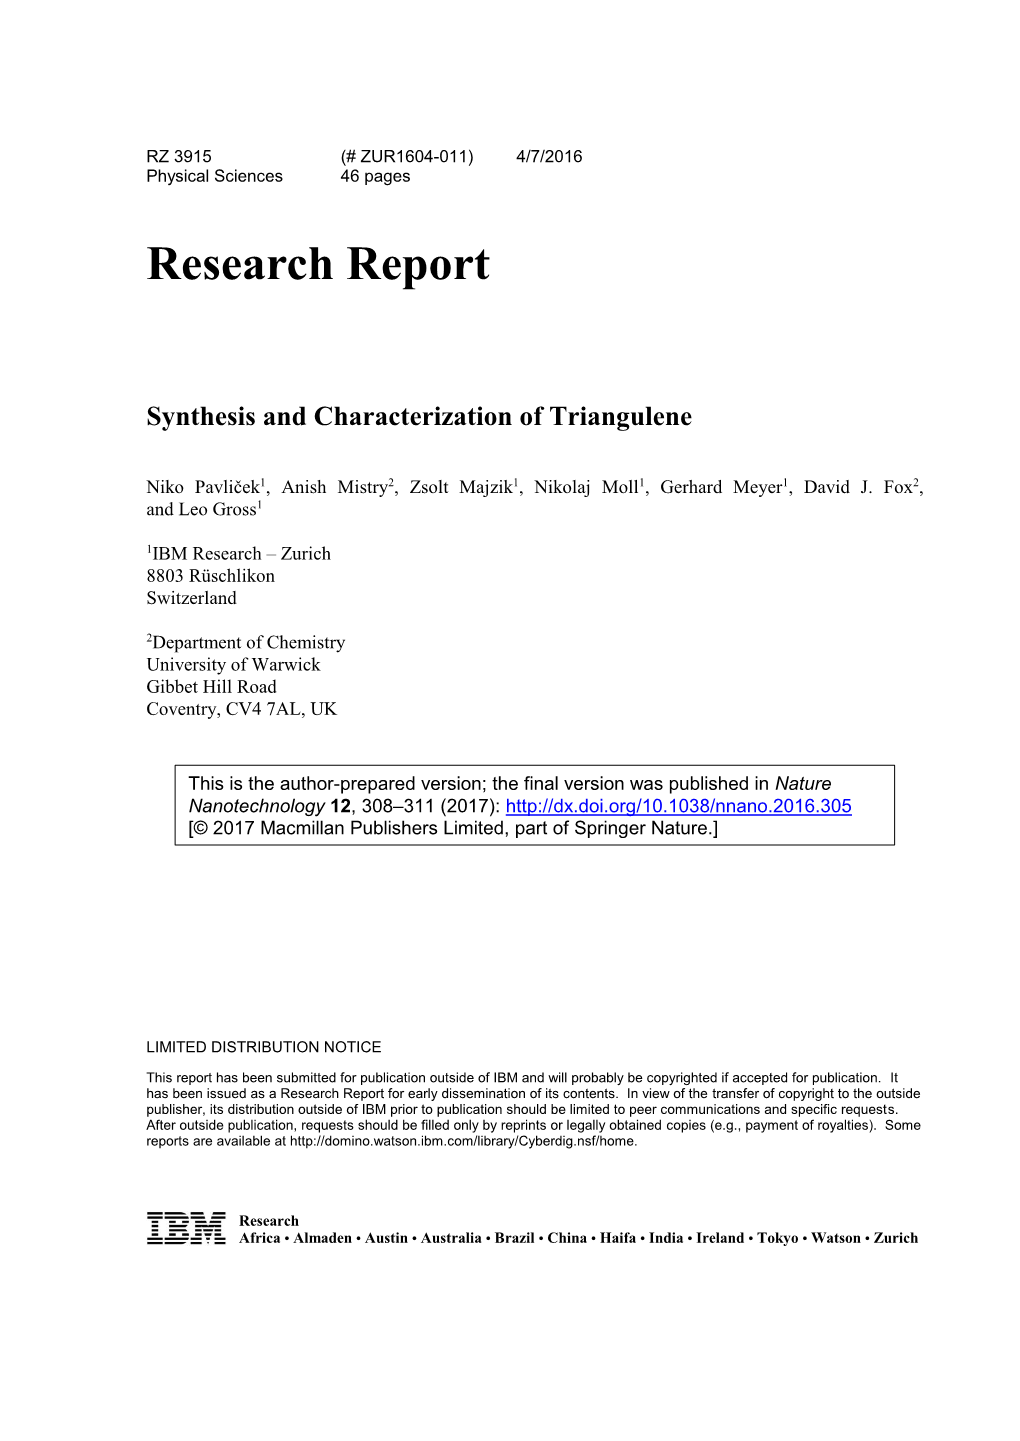 Research Report Synthesis and Characterization of Triangulene